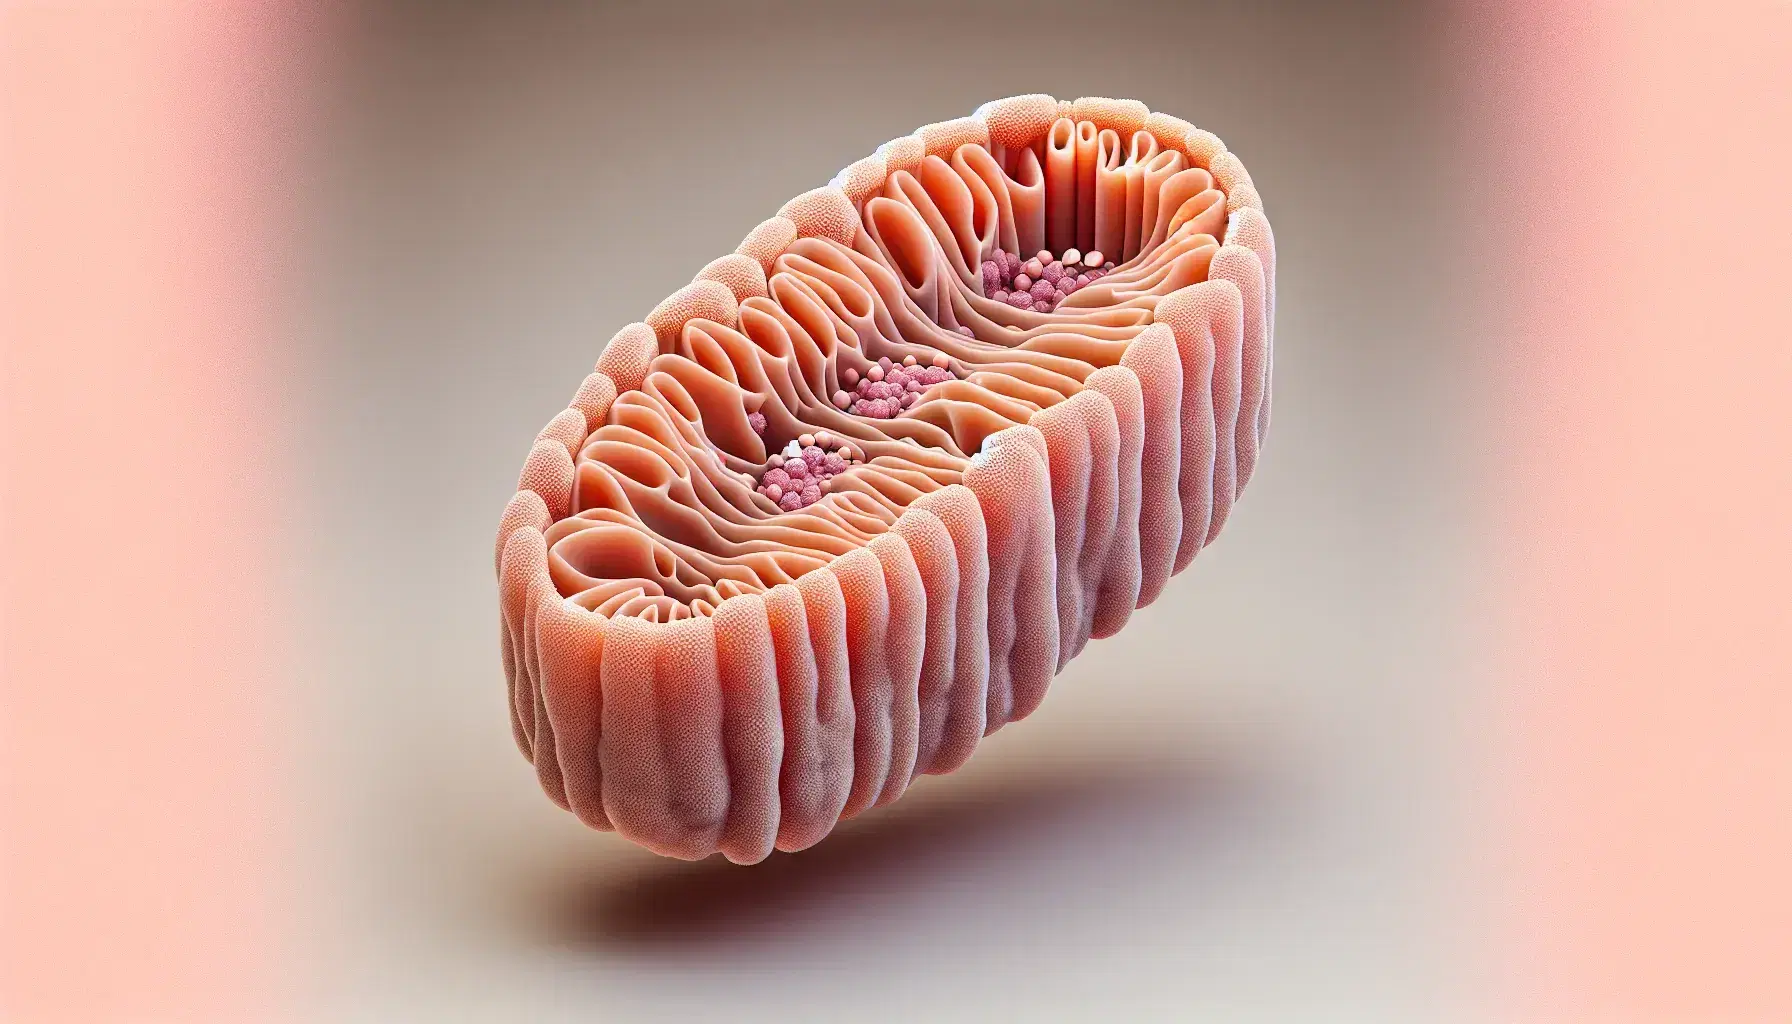 Detailed model of mitochondrion with salmon pink outer membrane, internal cristae and matrix with enzymes, on neutral background.